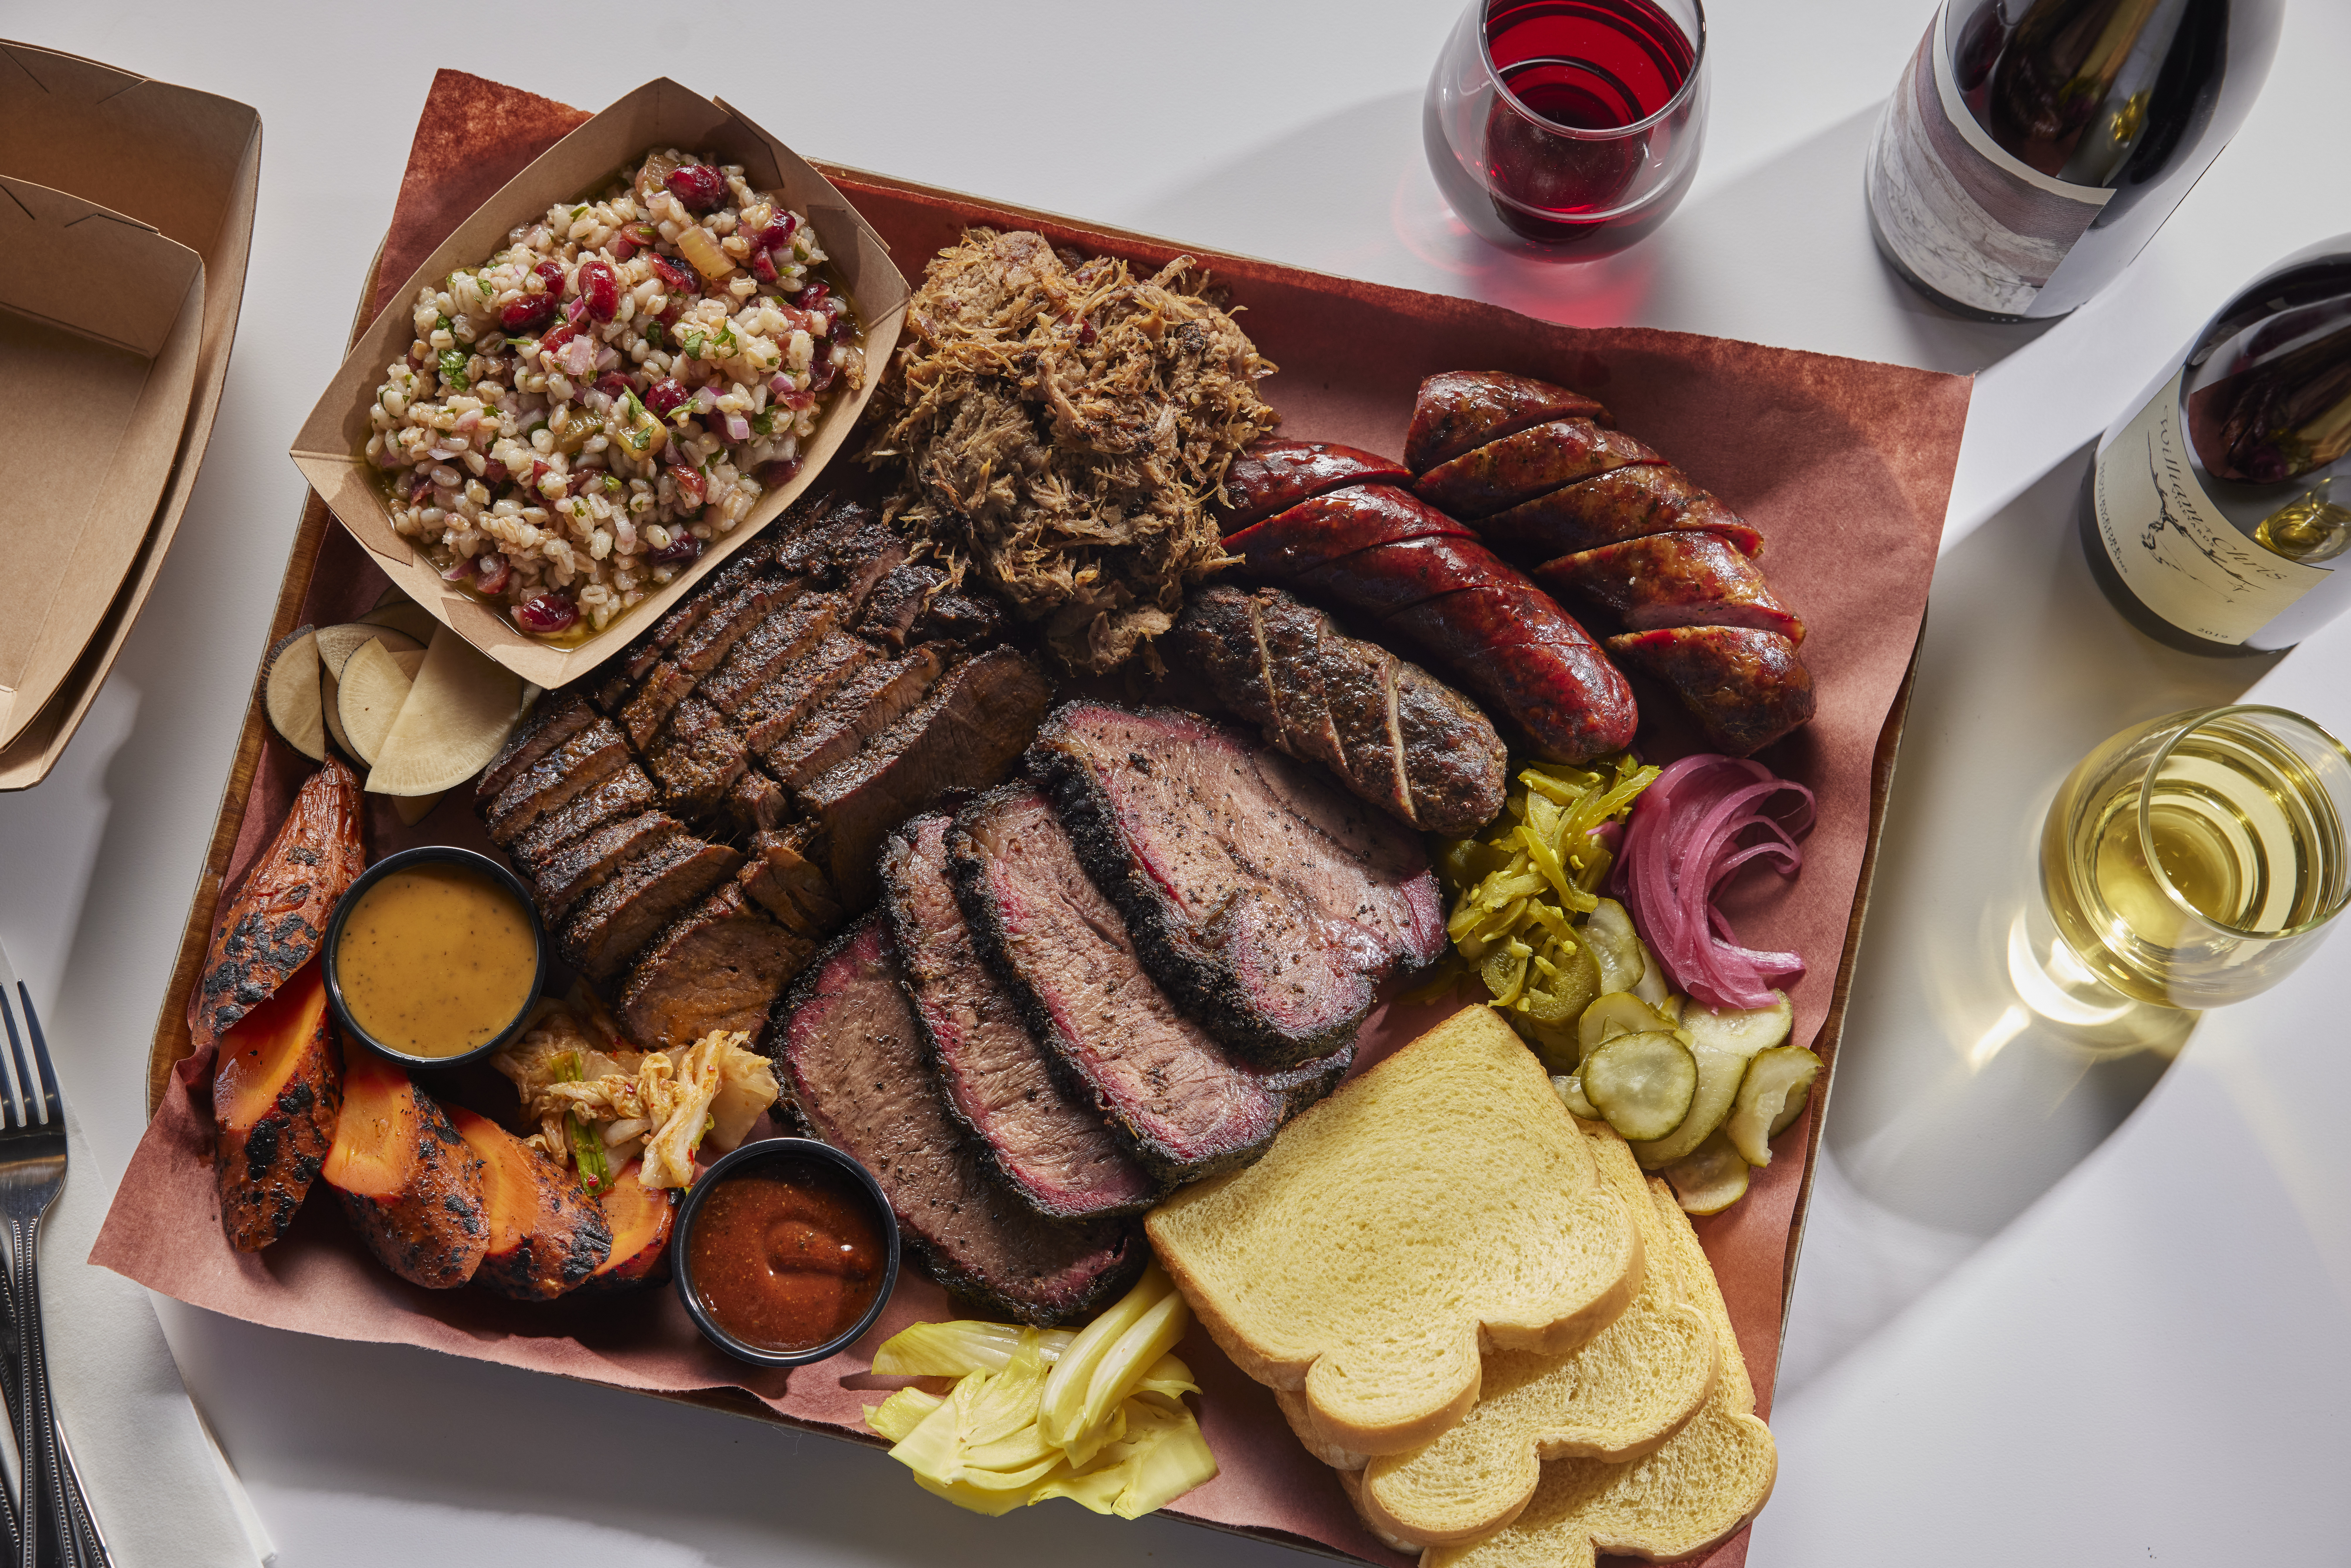 A tray with sliced meats, sides, and breads.